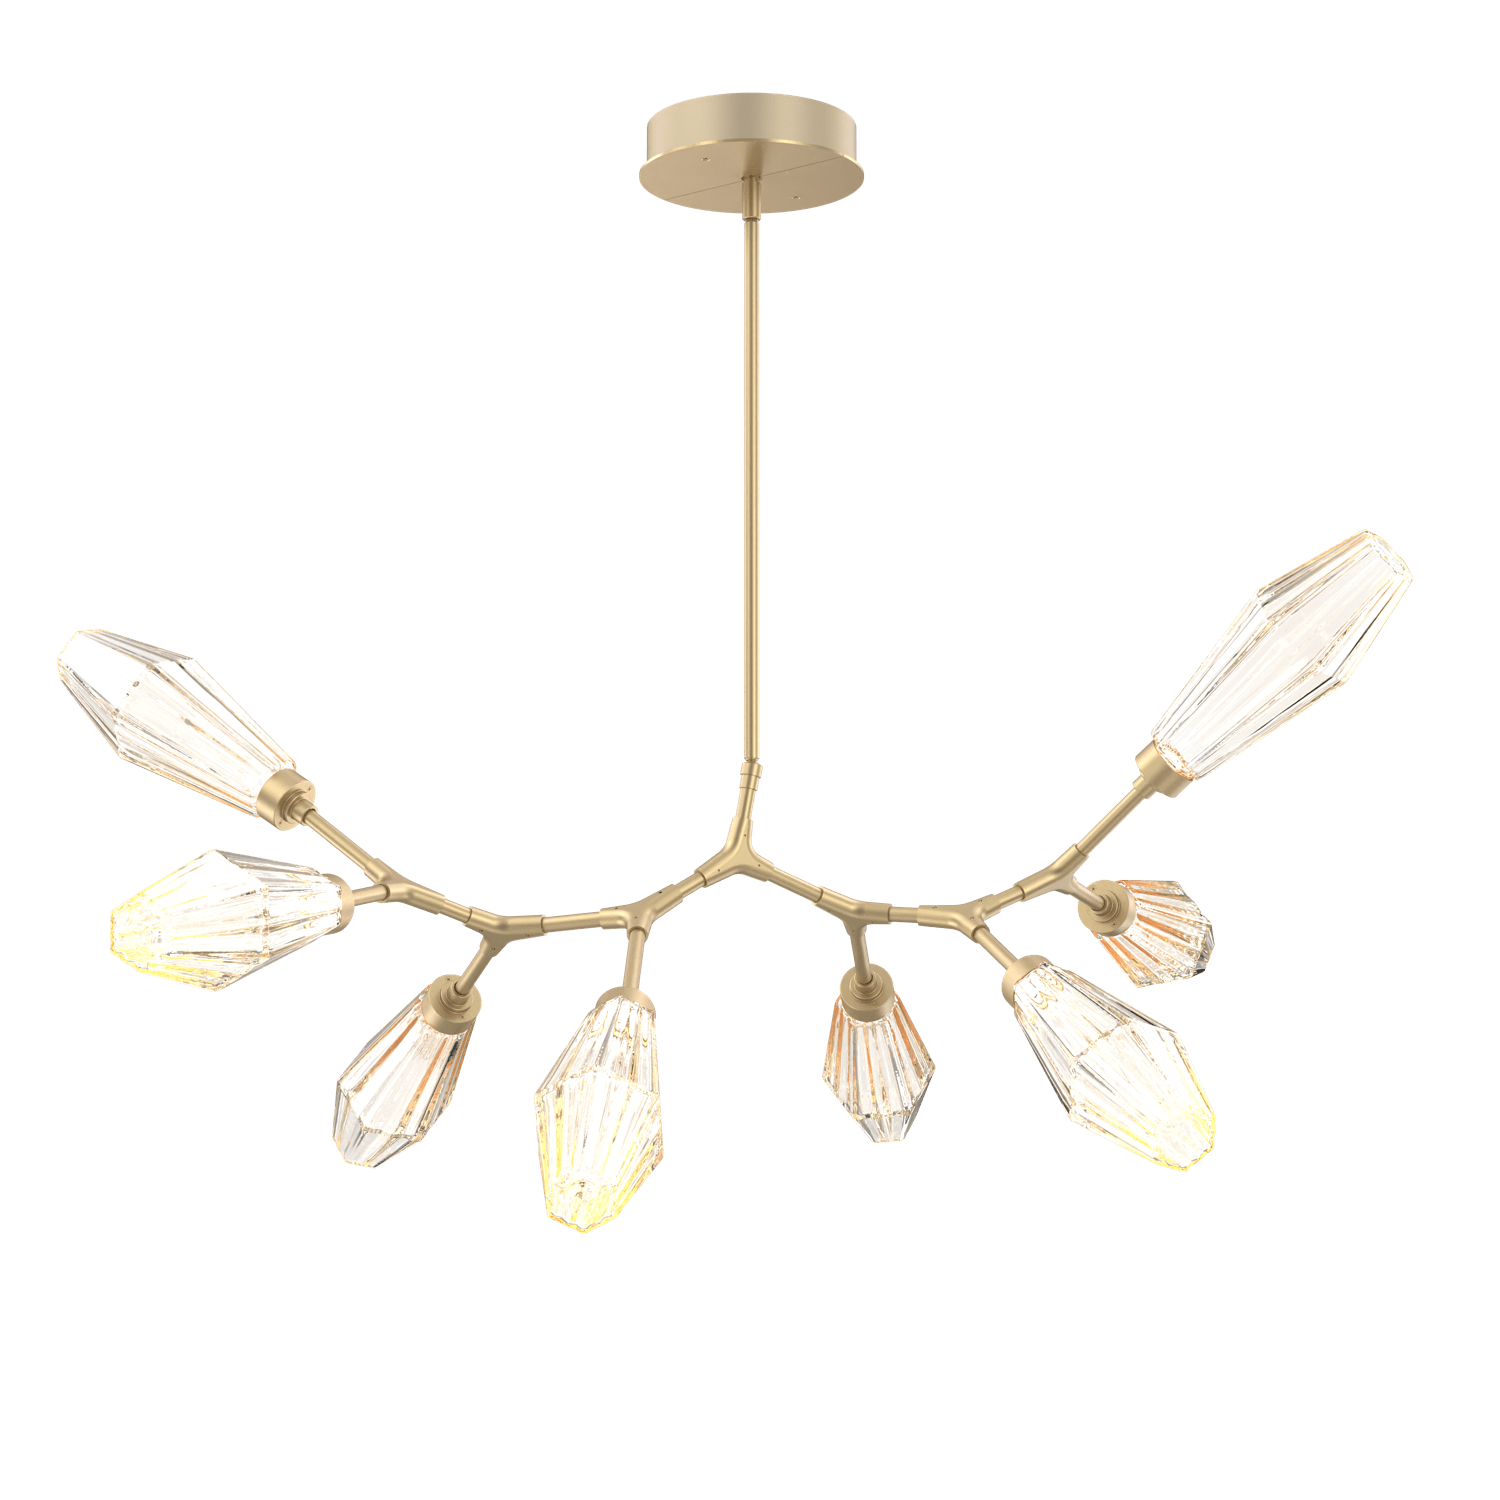 PLB0049-BB-GB-RA-Hammerton-Studio-Aalto-8-light-modern-branch-chandelier-with-gilded-brass-finish-and-optic-ribbed-amber-glass-shades-and-LED-lamping